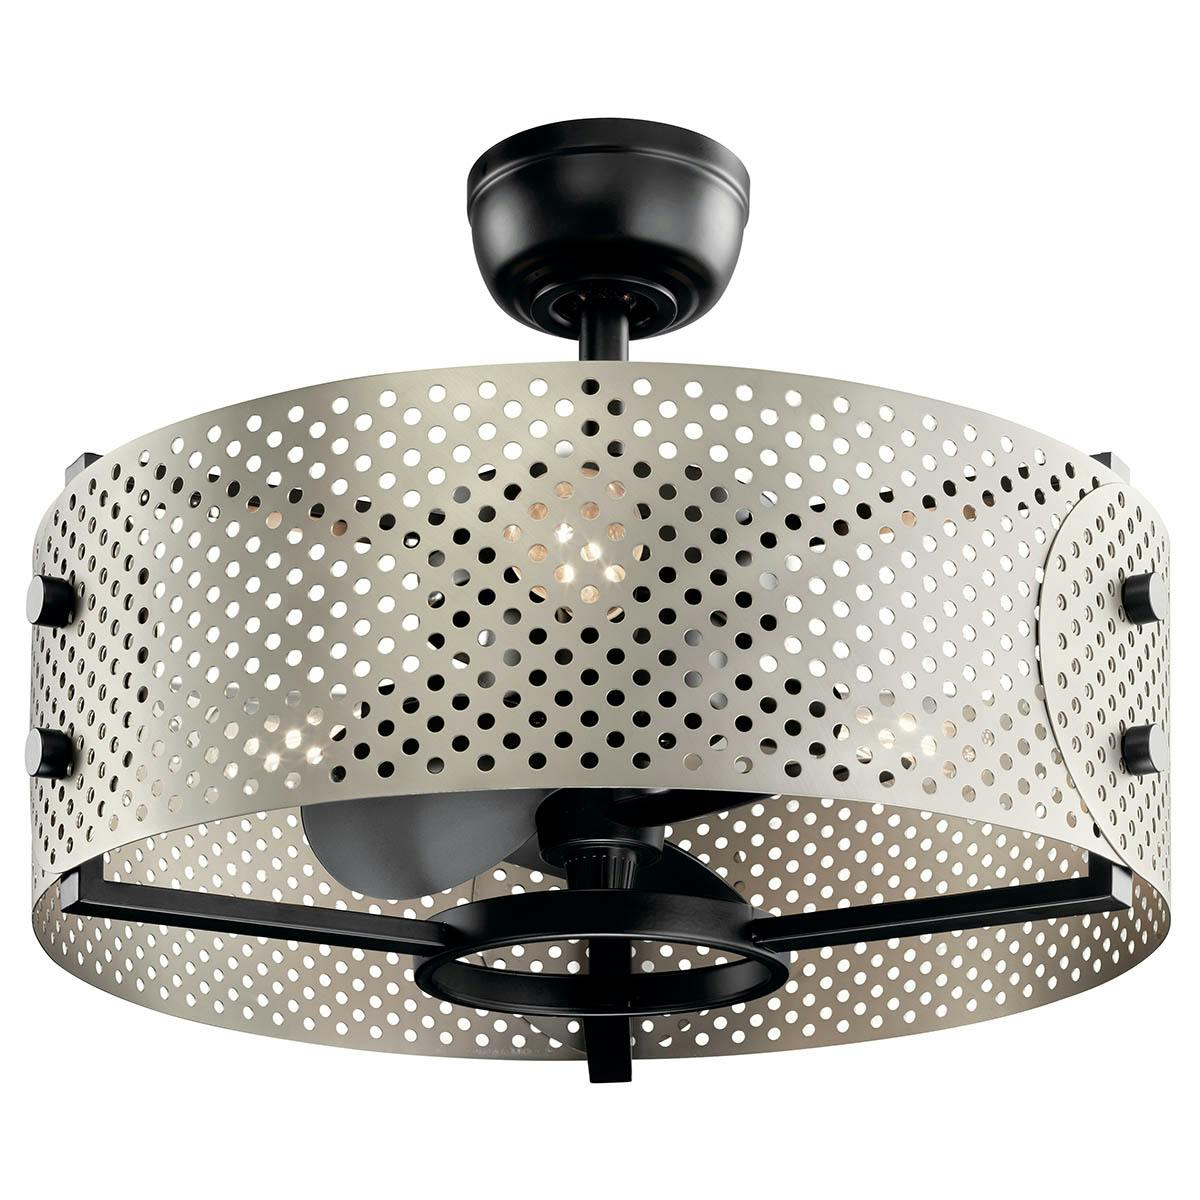 Eyrie 23" Fan Nickel Cage Black Accents on a white background